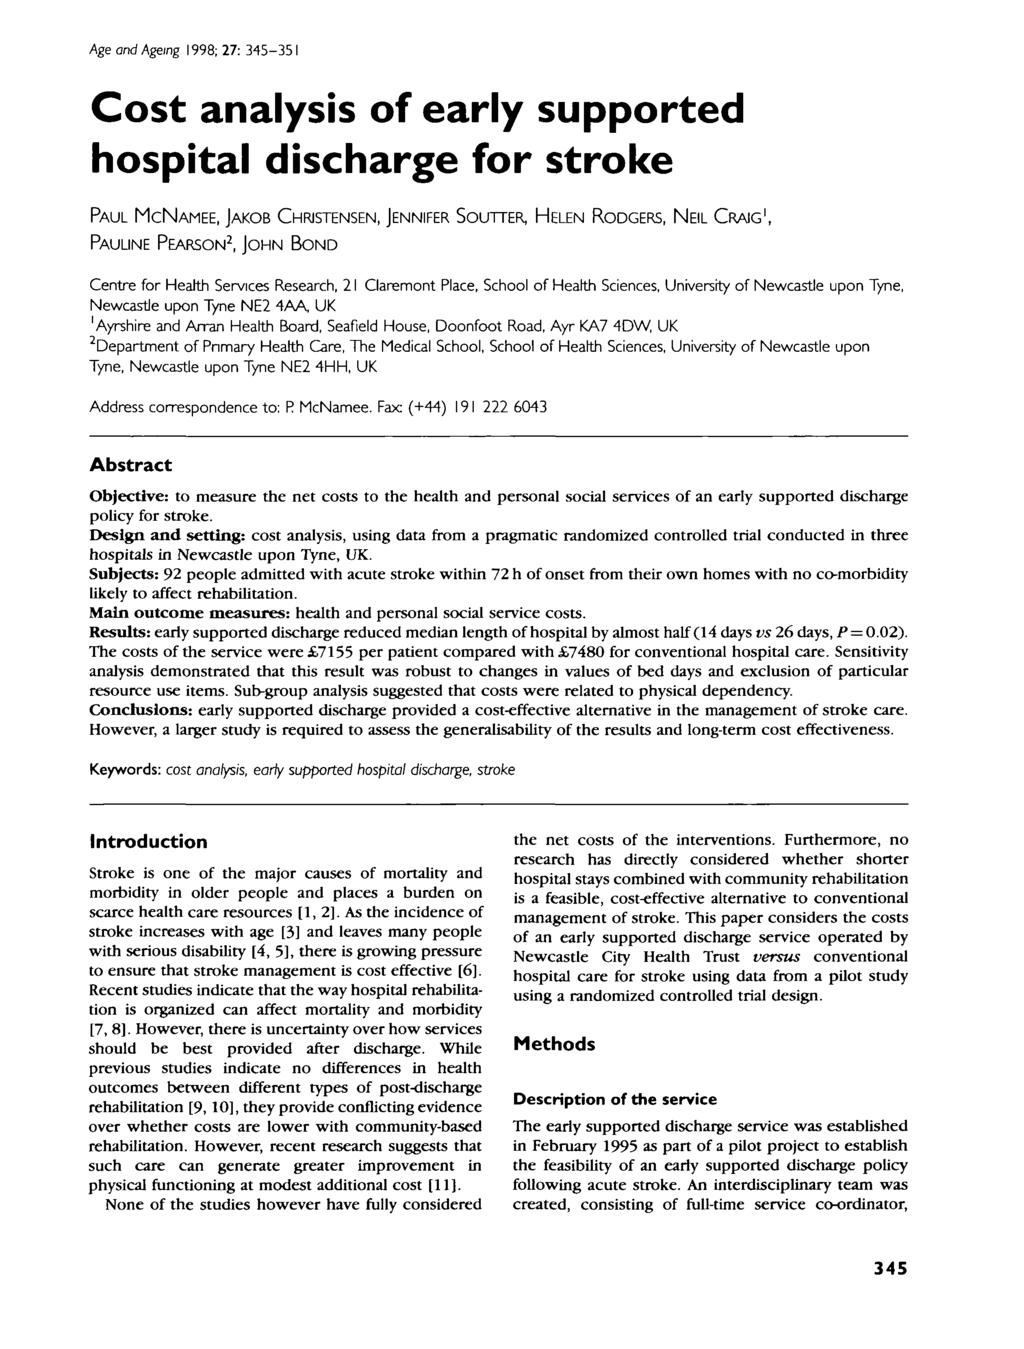 Age and Ageing 1998; 27: 345-351 Cost analysis of early supported hospital discharge for stroke PAUL MCNAMEE, JAKOB CHRISTENSEN, JENNIFER SOUTTER, HELEN RODGERS, NEIL CRAIG 1, PAULINE PEARSON 2, JOHN